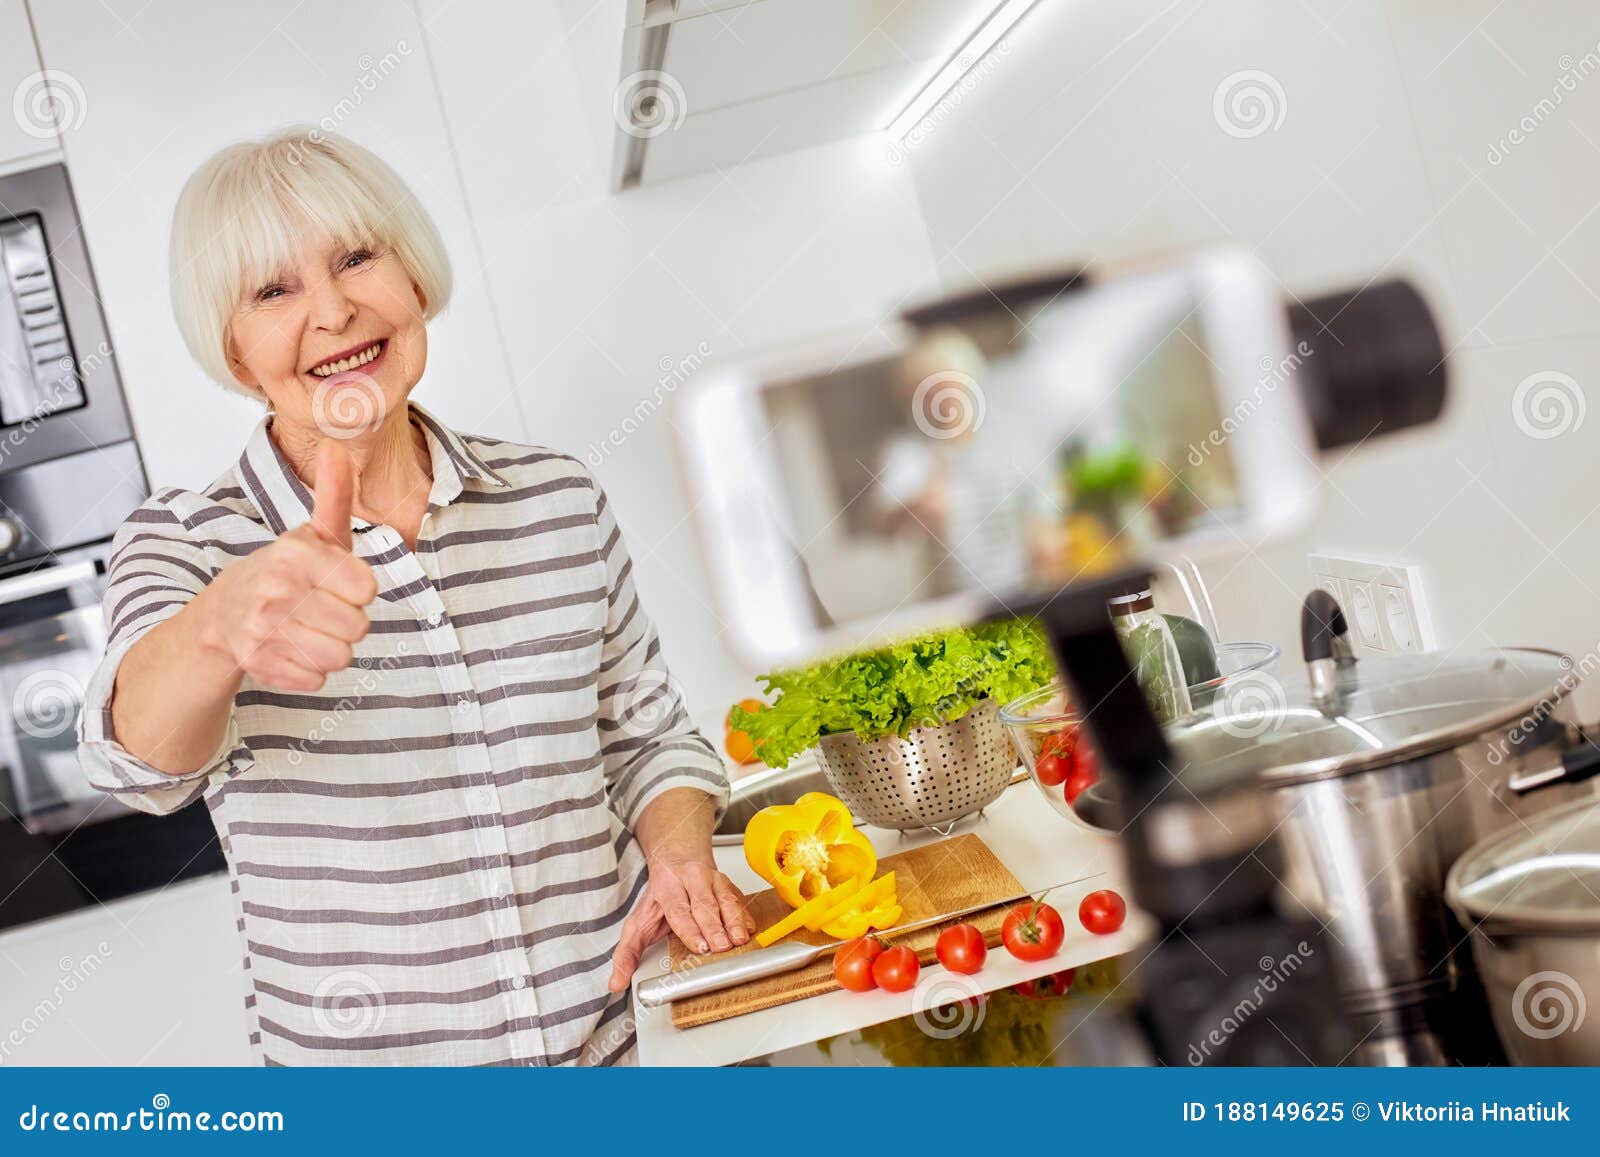 Grey Hair Woman Using Modern Smartphone, Cooking Food, Recording Video  Stock Image - Image of broadcast, happy: 188149625